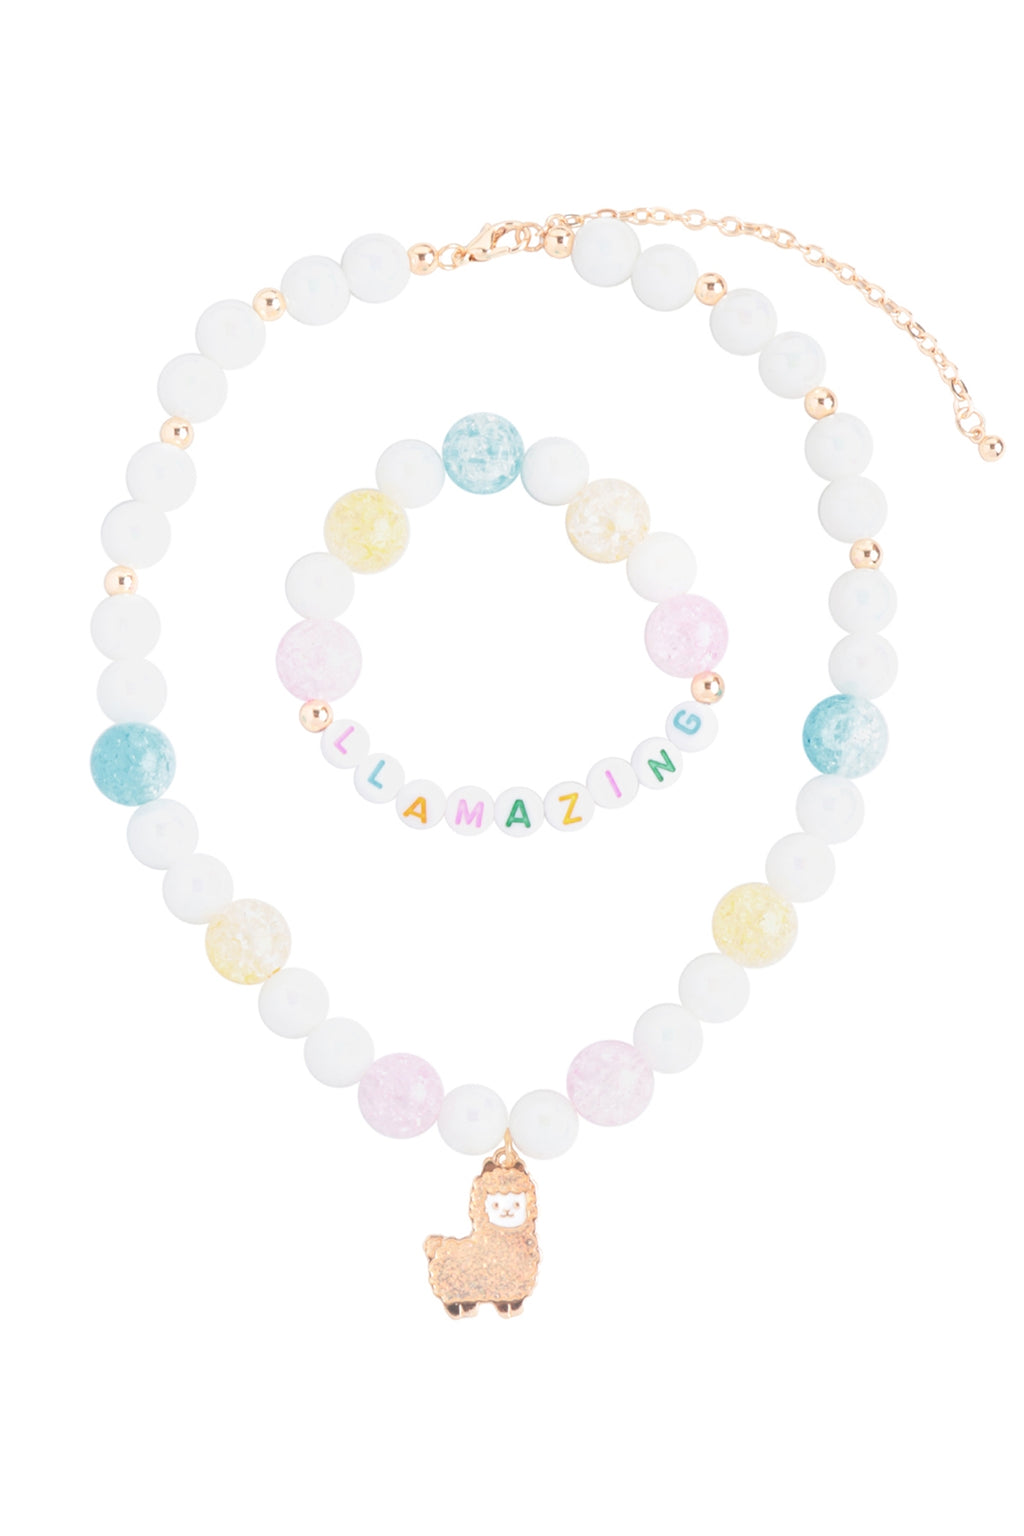 Amazing LLama Pearl Beads with Matching 14" Necklace and 6.25" Bracelet Set - Pack of 6